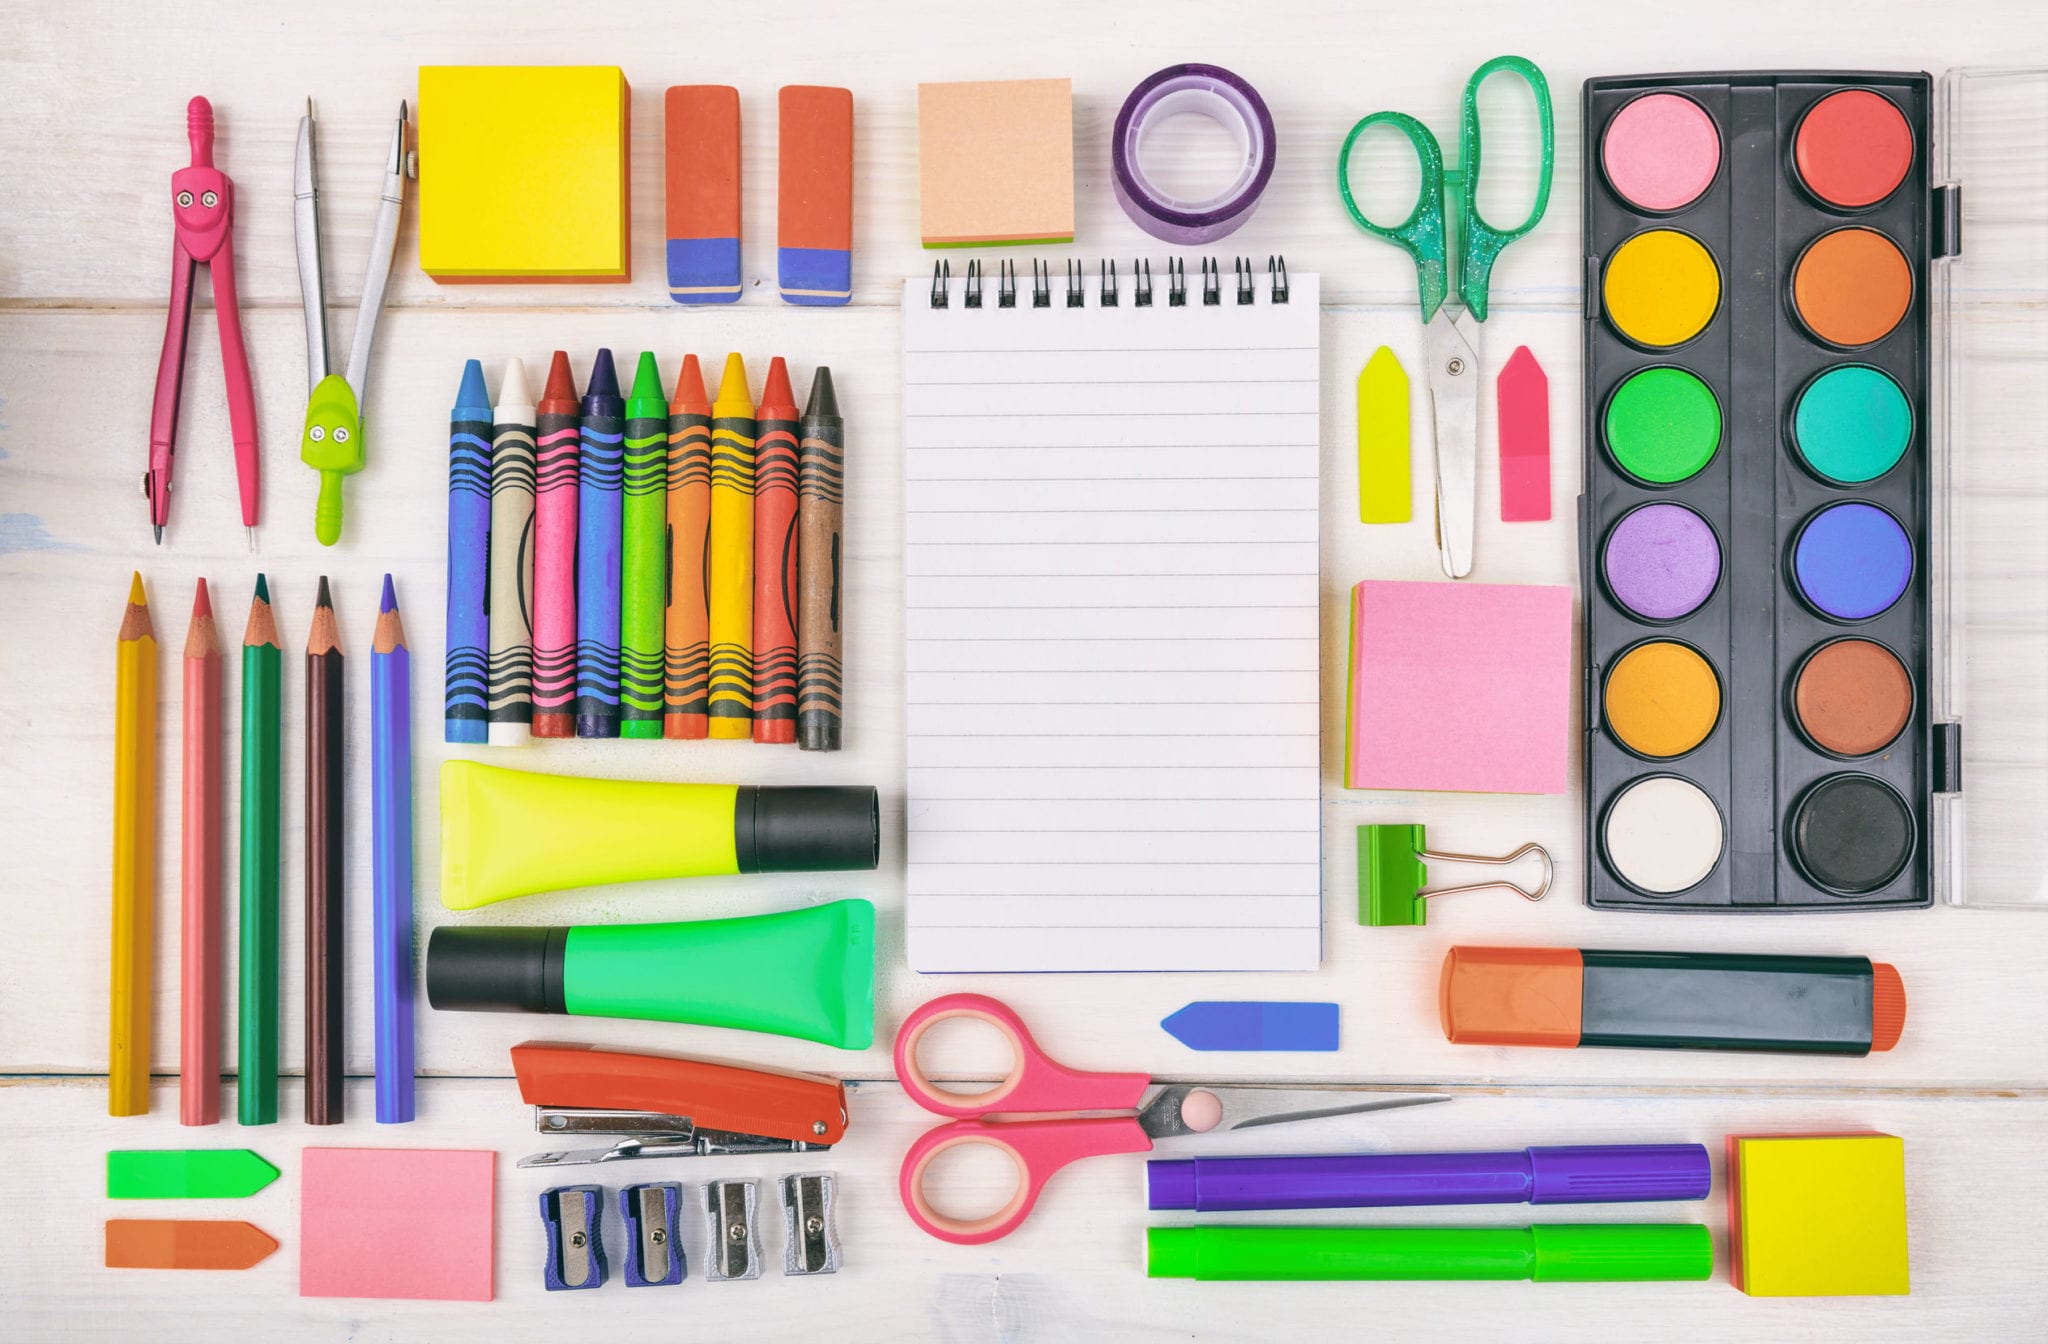 Dangerous School Supplies: Something Else for FL Parents to Watch For